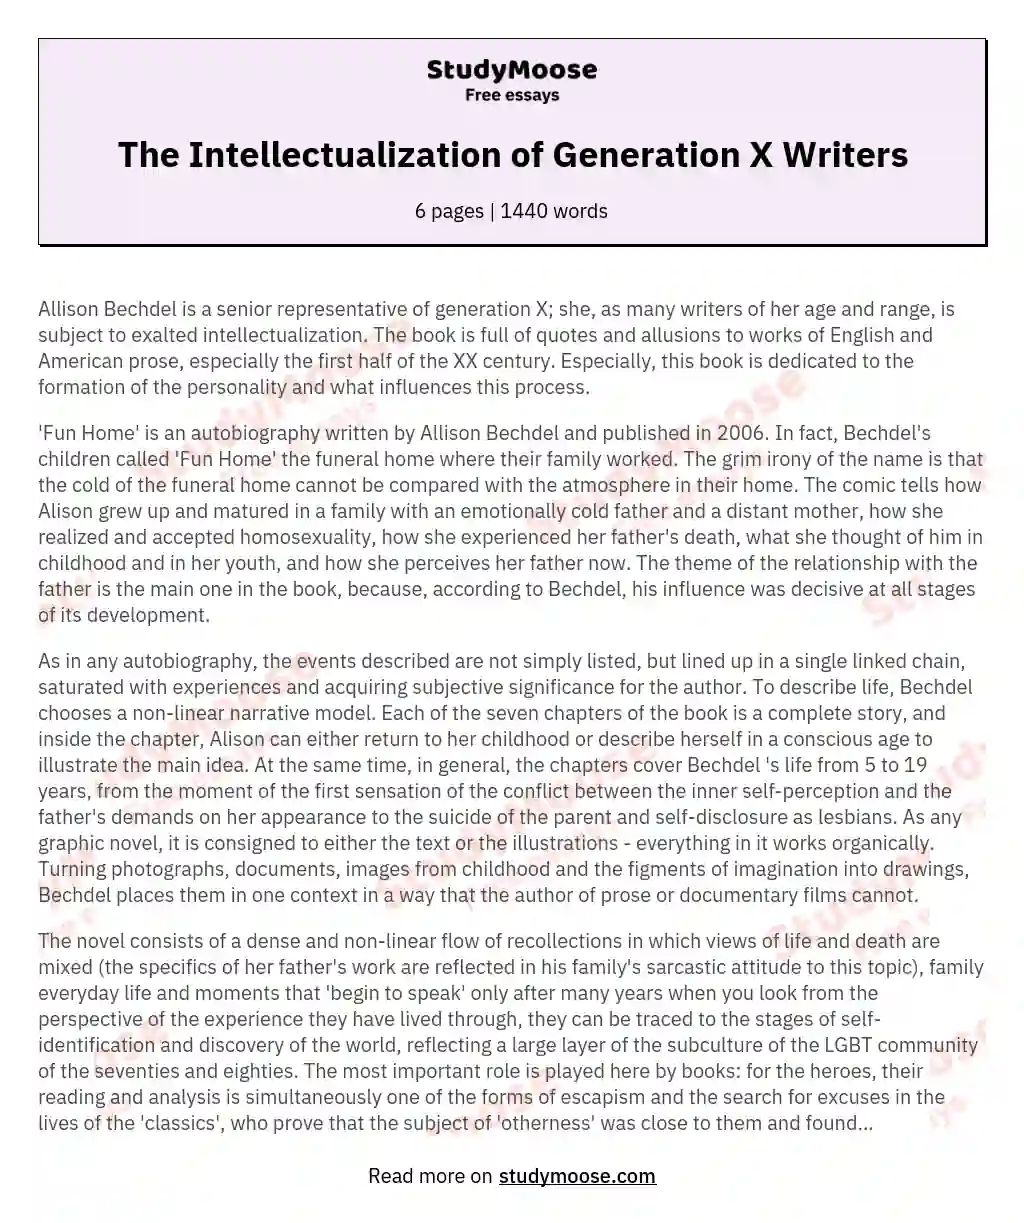 The Intellectualization of Generation X Writers essay